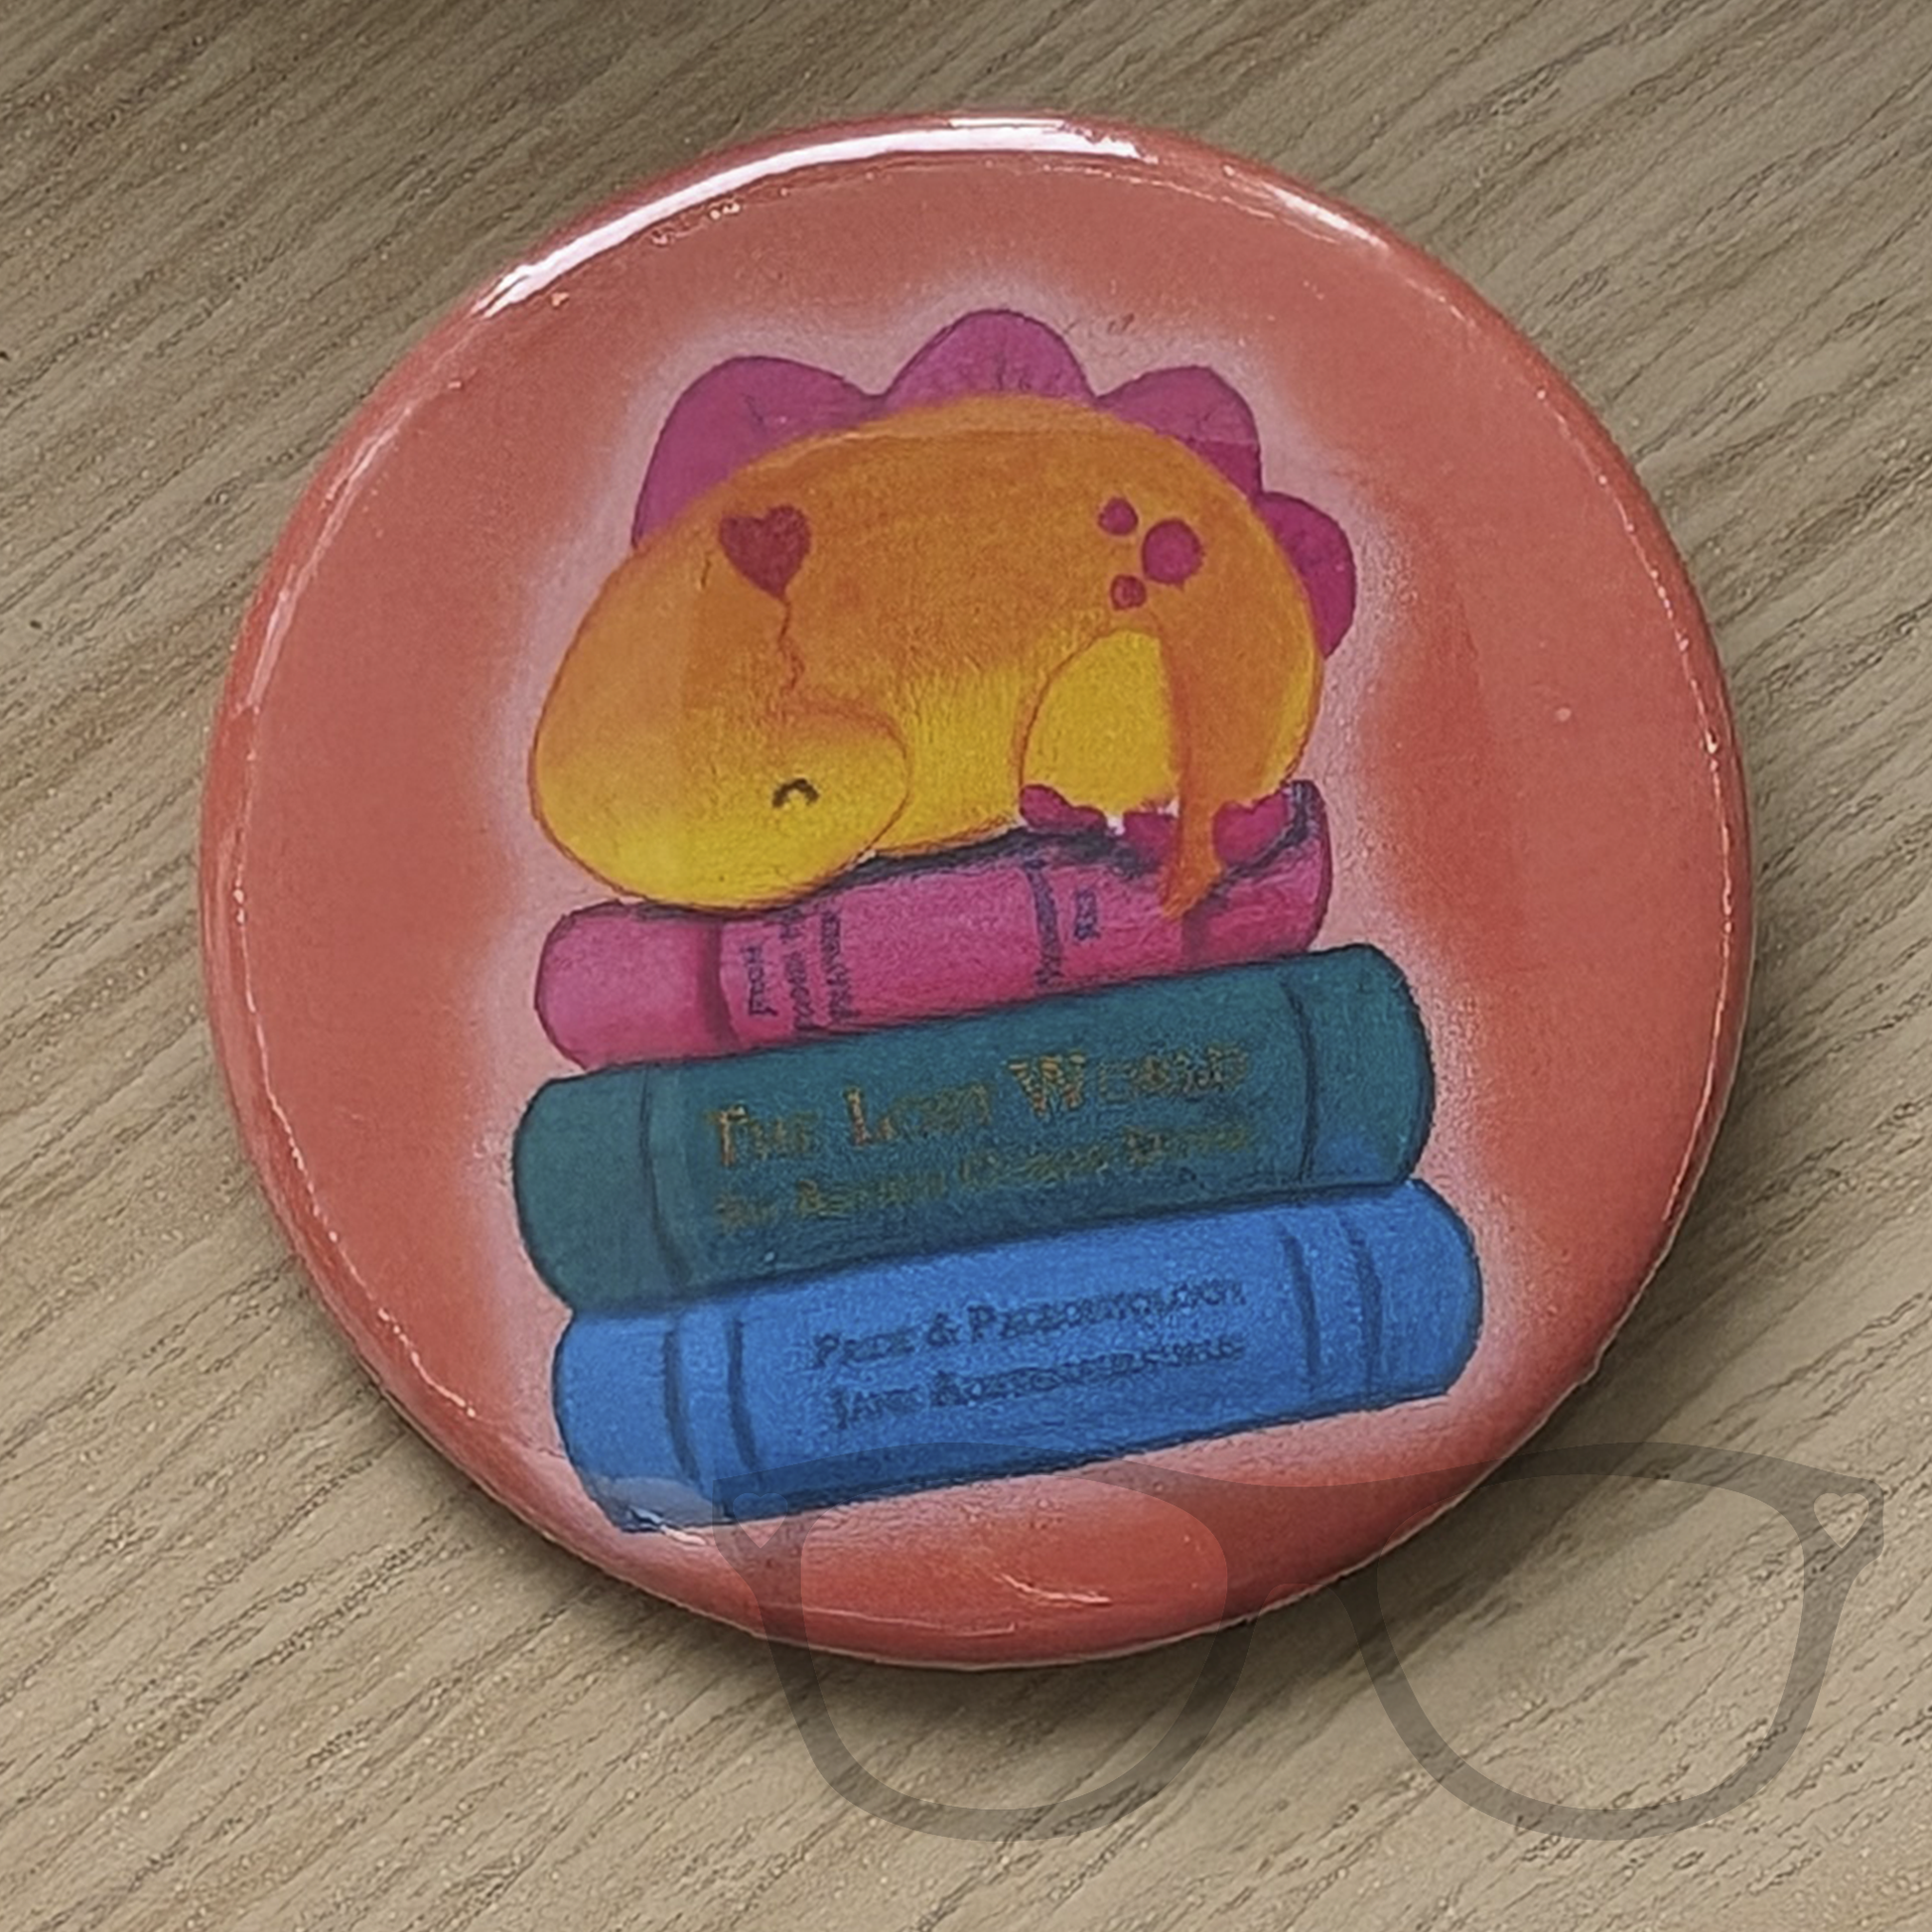 circular 58mm button badge featuring Derek the Stegosaurus napping on some books 